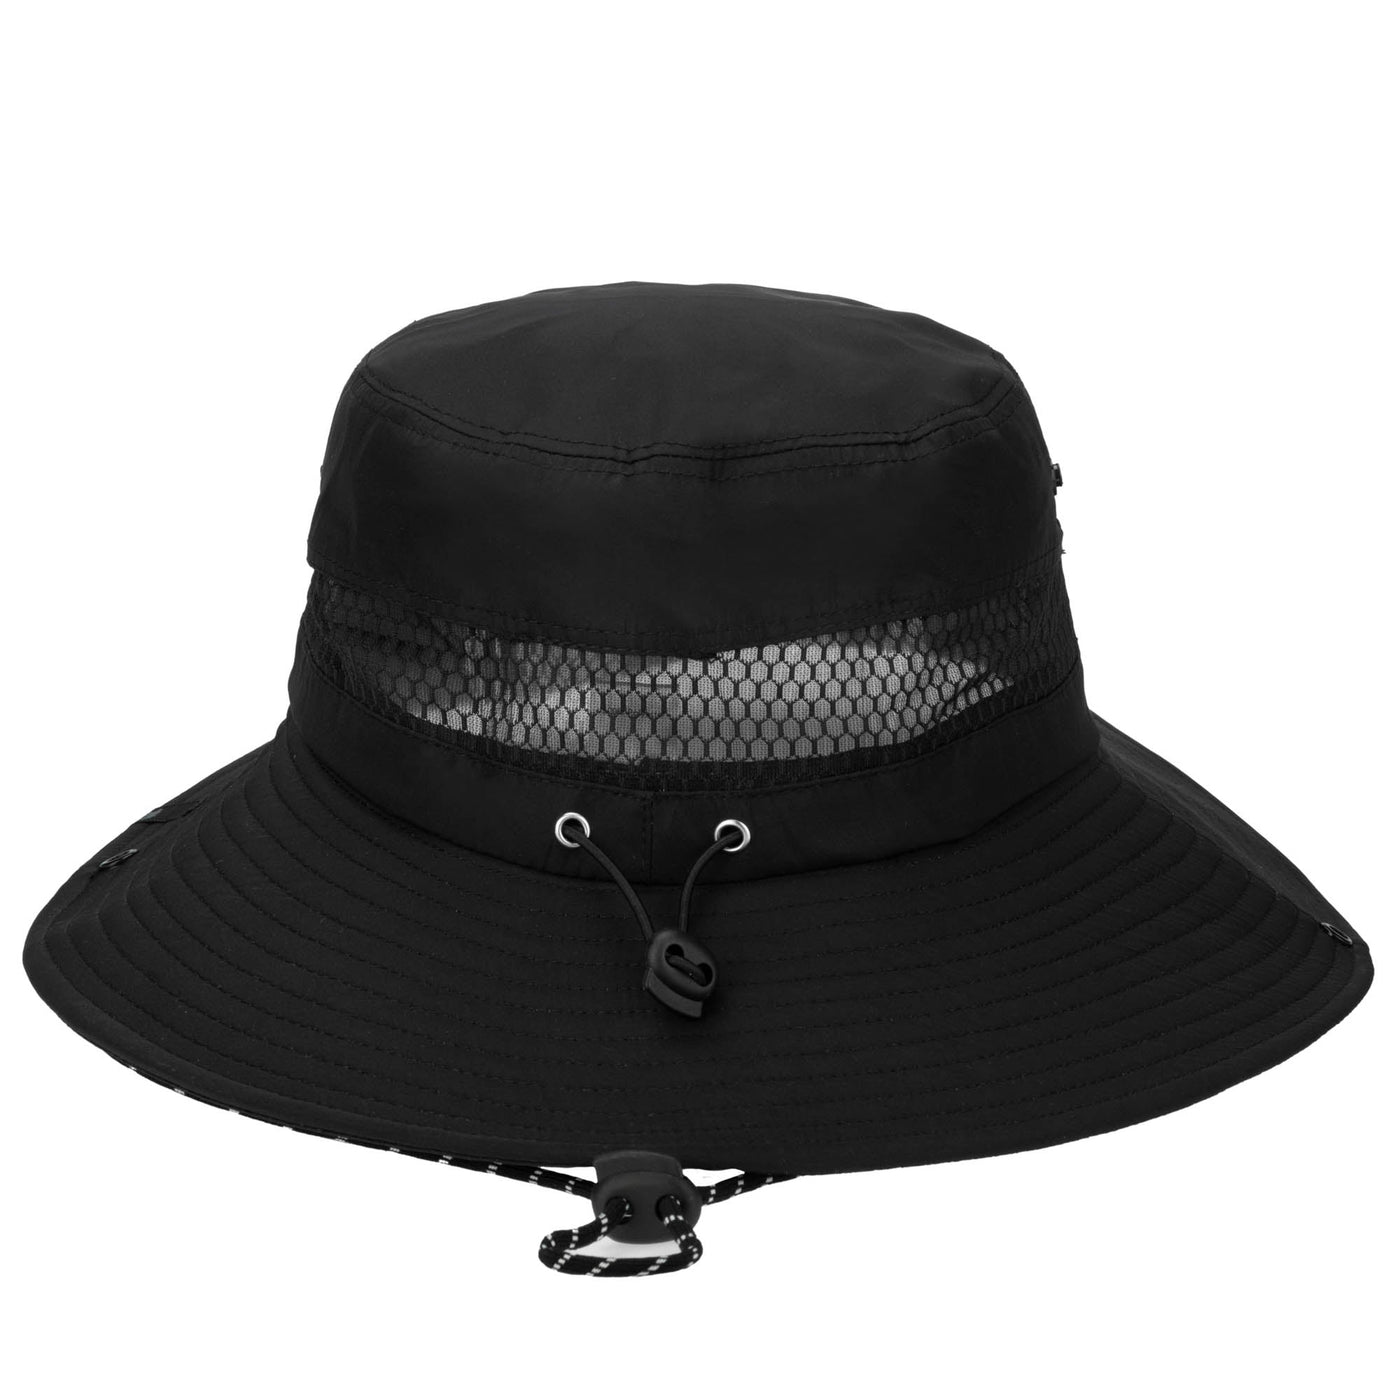 SDHC Outdoor Boonie Hat with Neck Flap and Adjustable Chin Cord Black